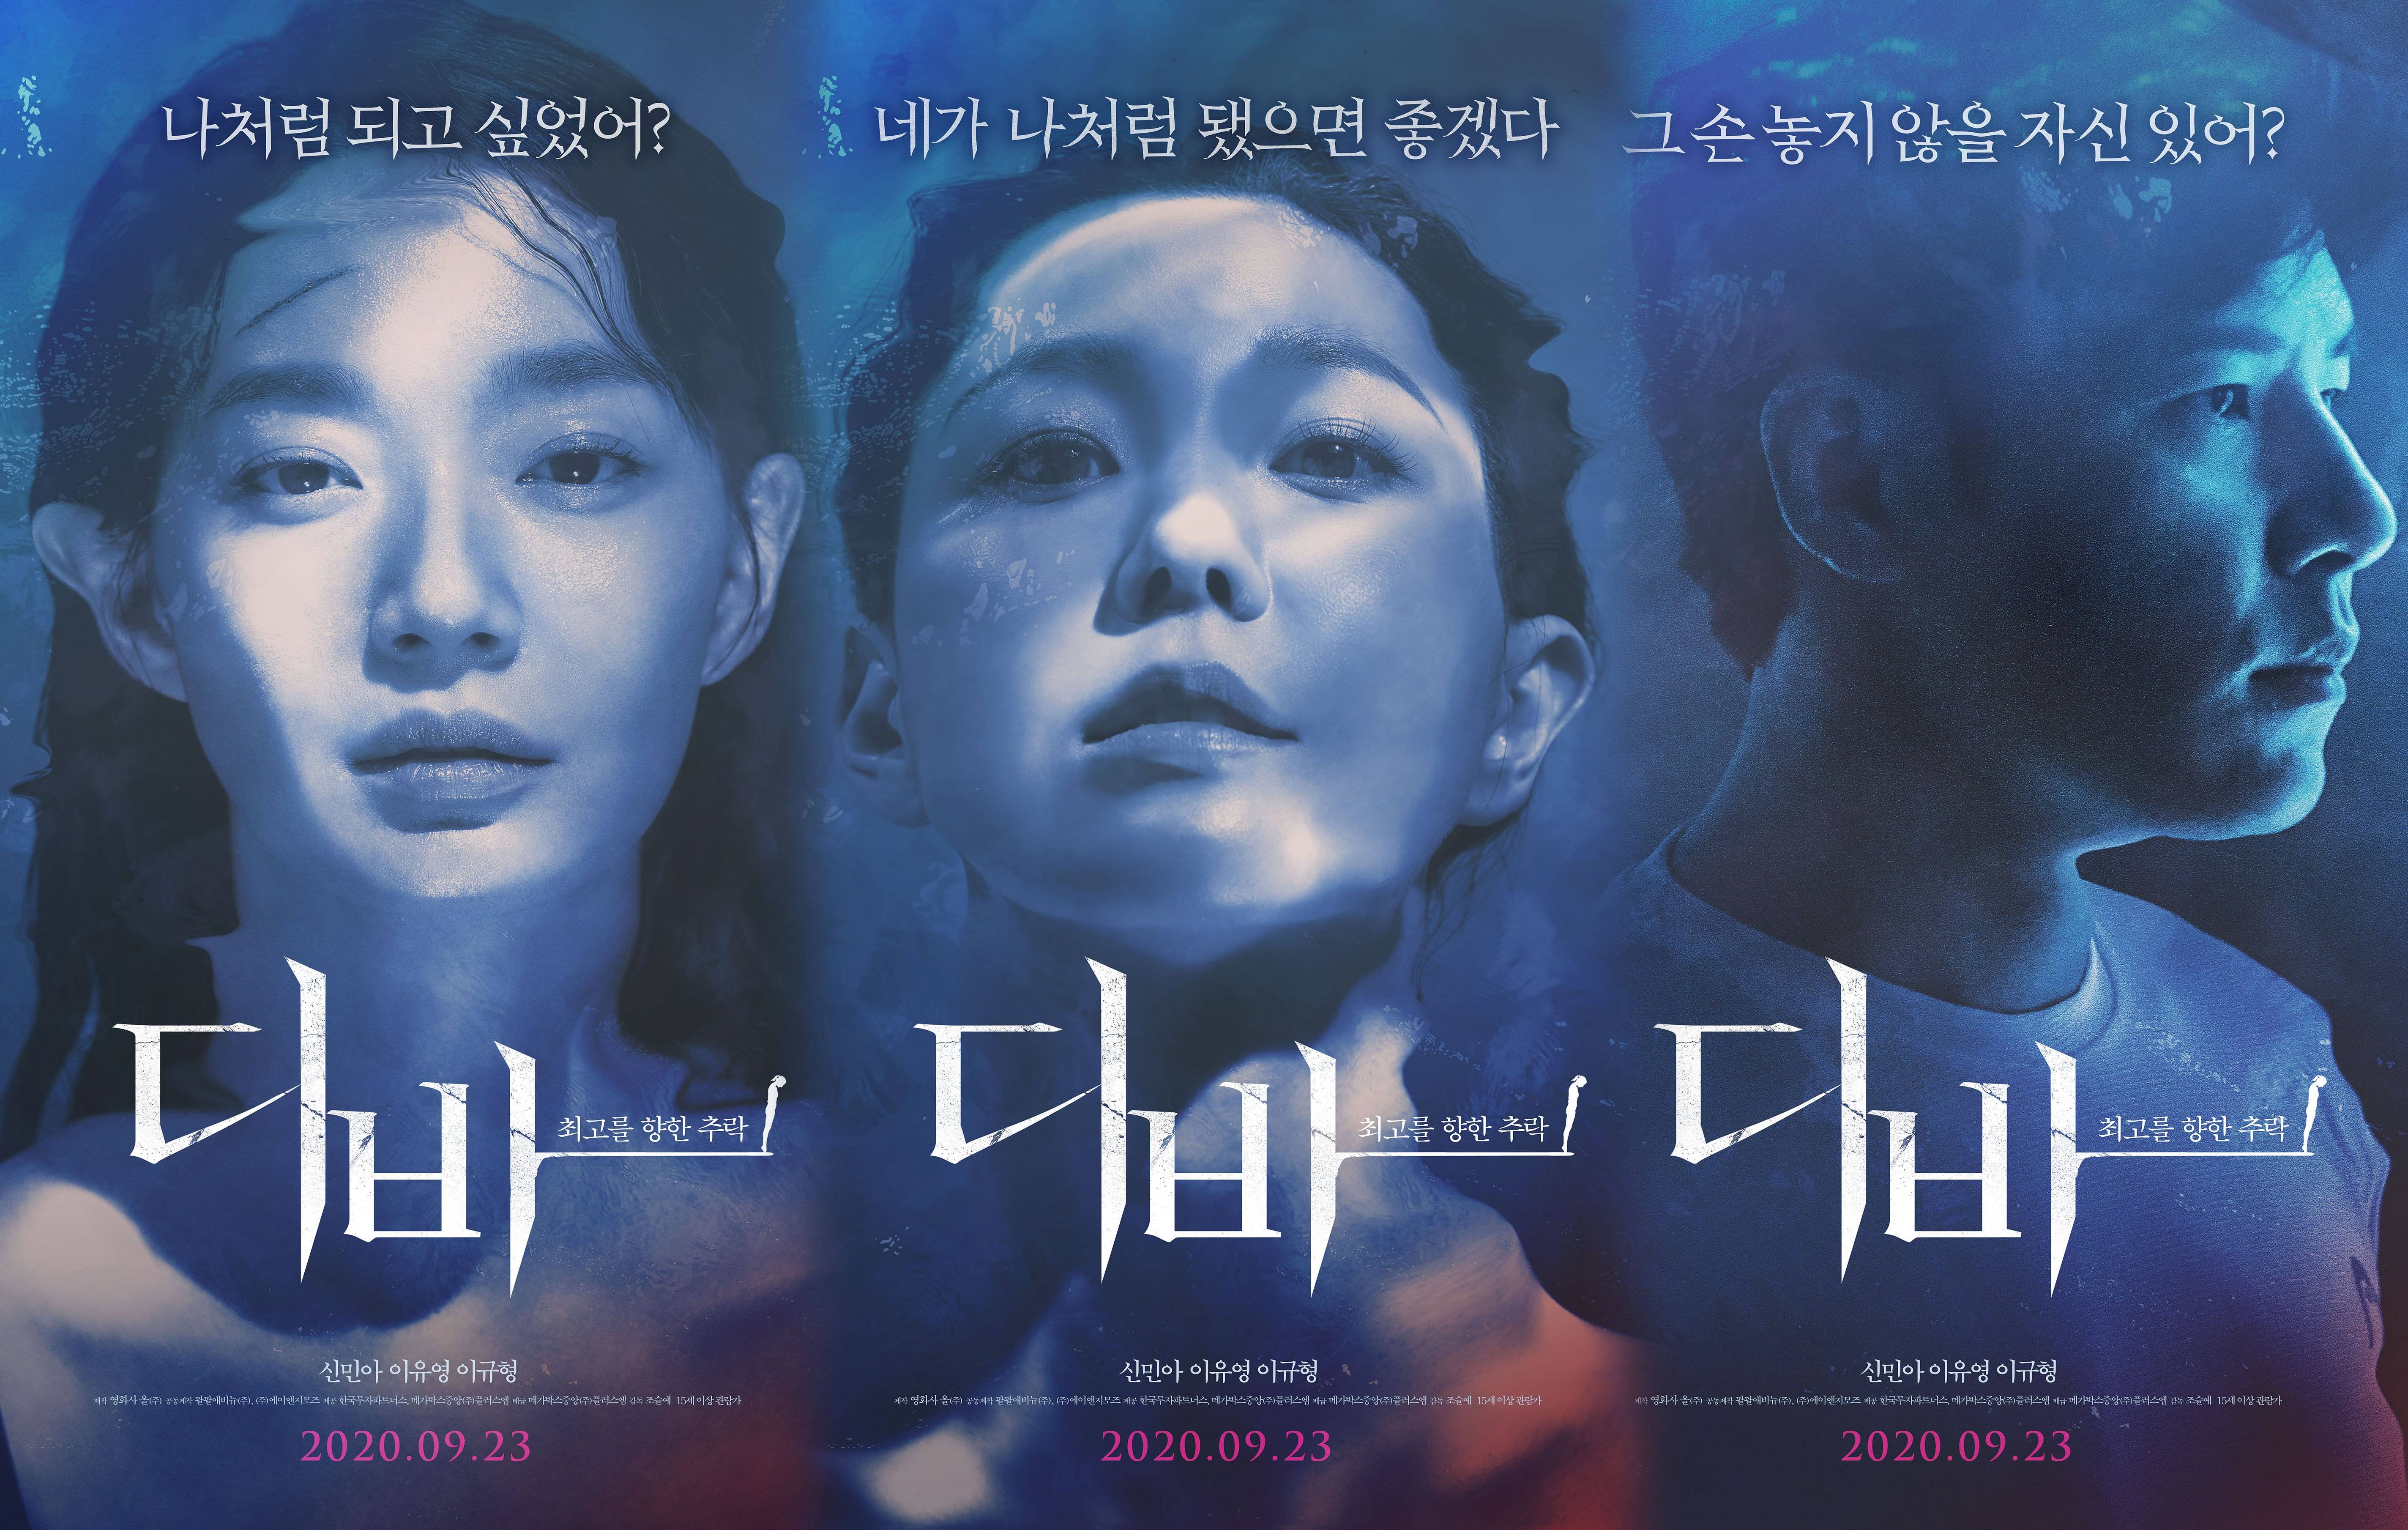 Natur Diligence over Photos] New Character Posters Added for the Upcoming Korean Movie 'Diva' @  HanCinema